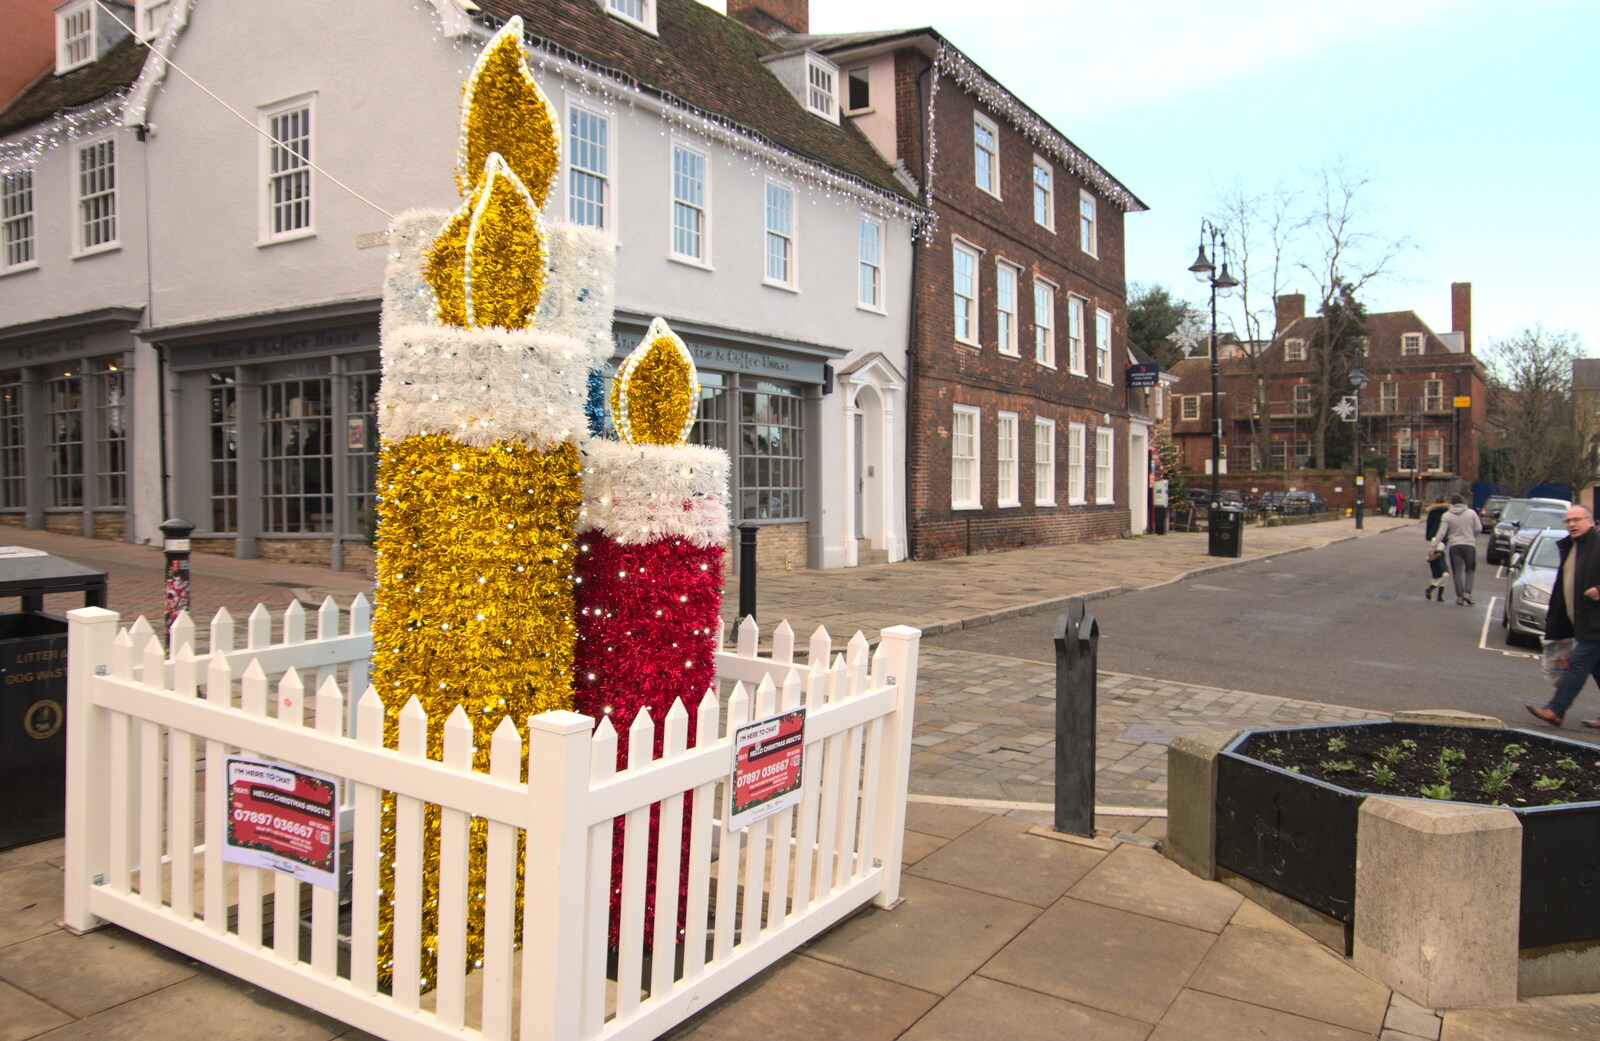 Christmas candles on Angel Hill from A Few Hours in Bury St. Edmunds, Suffolk - 3rd January 2022